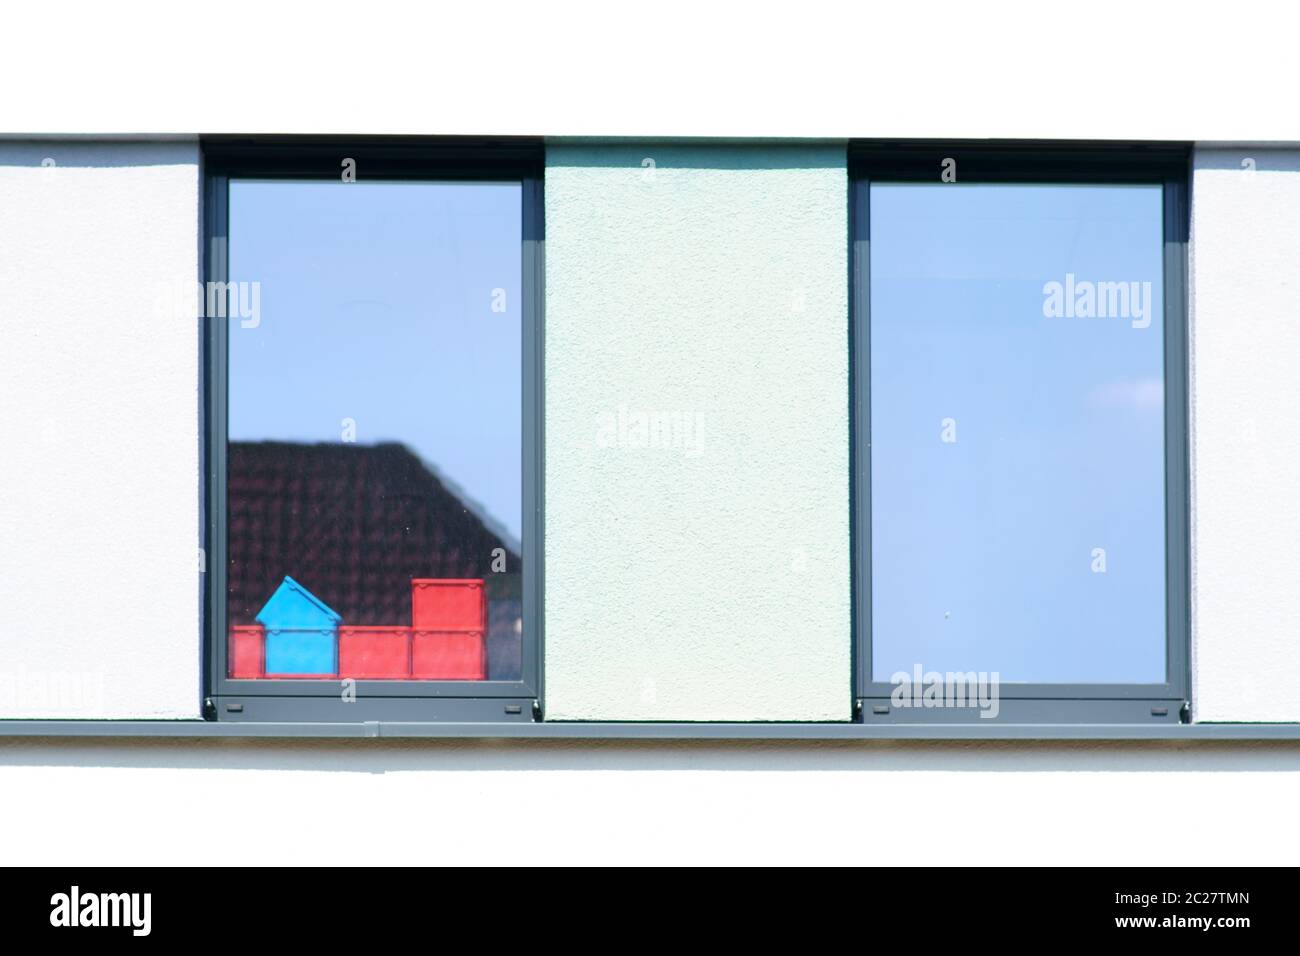 Plastic containers stand behind a window of a business building. Stock Photo